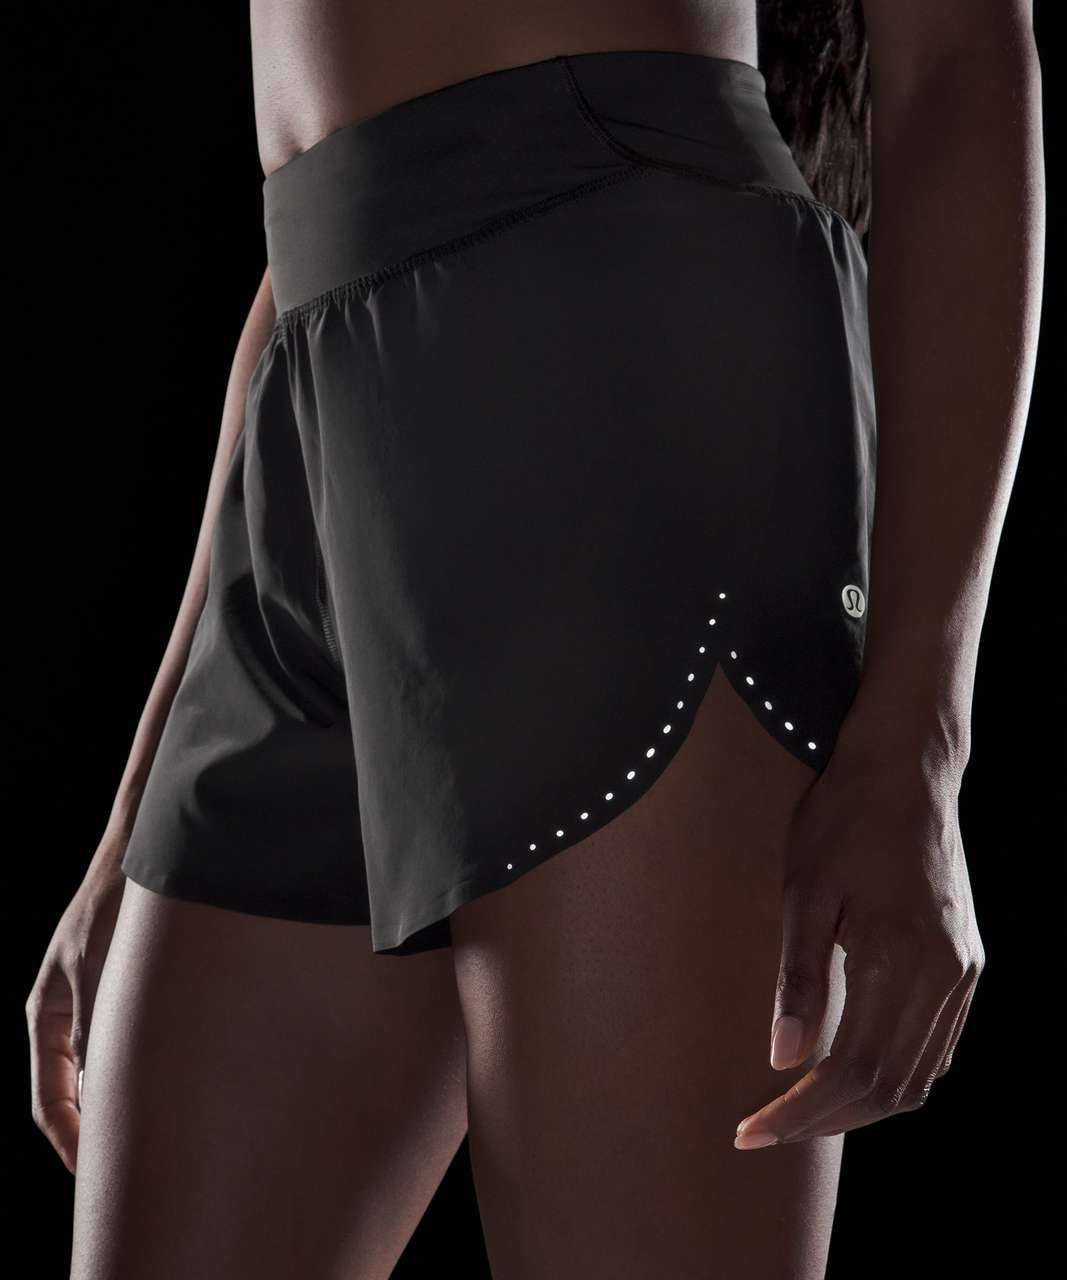 Lululemon Fast and Free Reflective High-Rise Classic-Fit Short 3" - Black